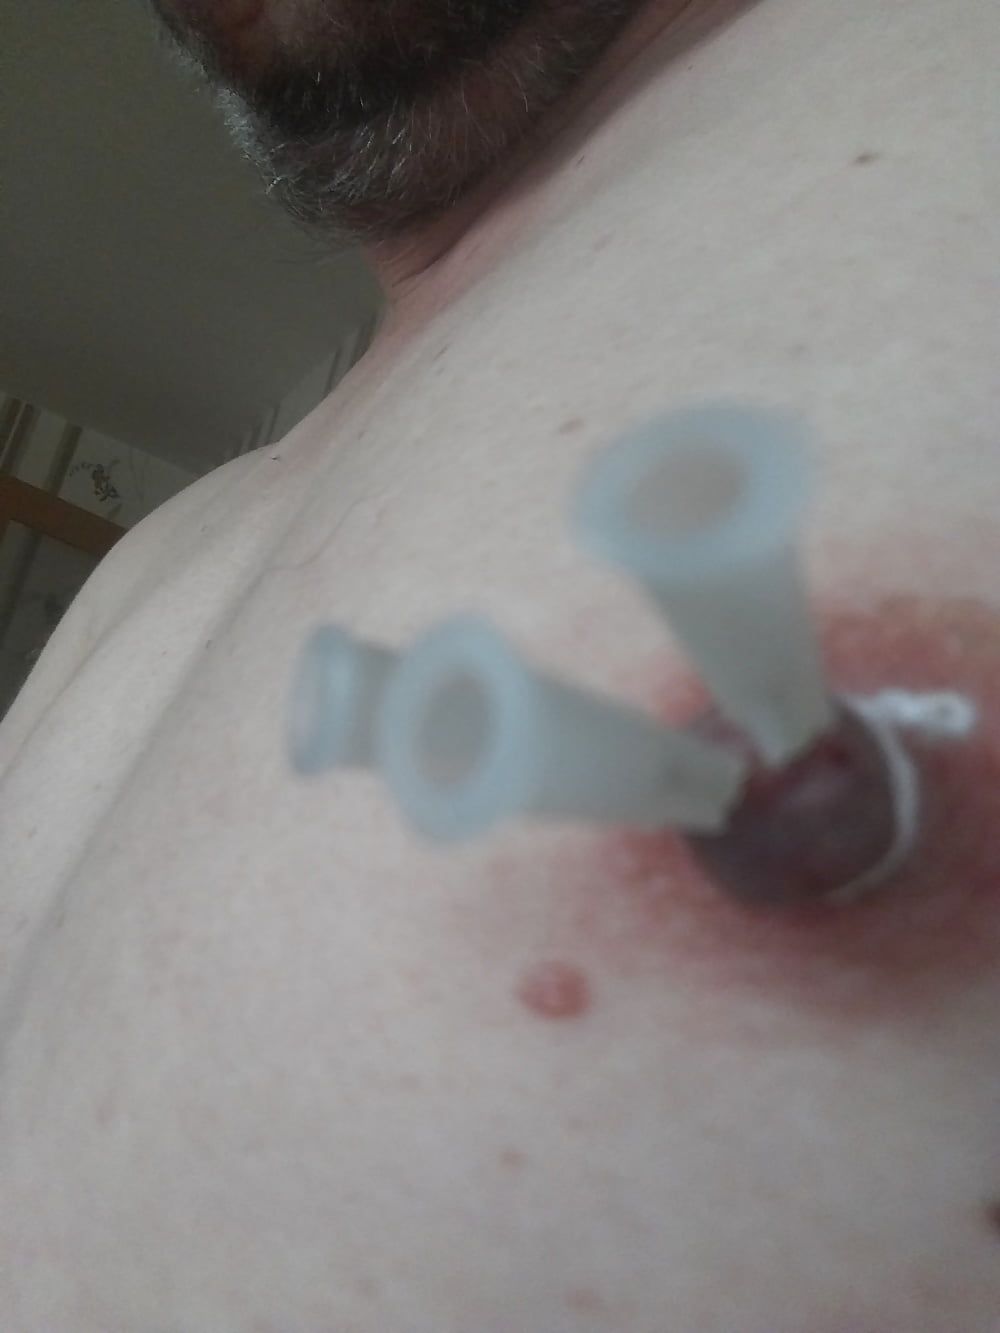 some more needles in my nipples #2